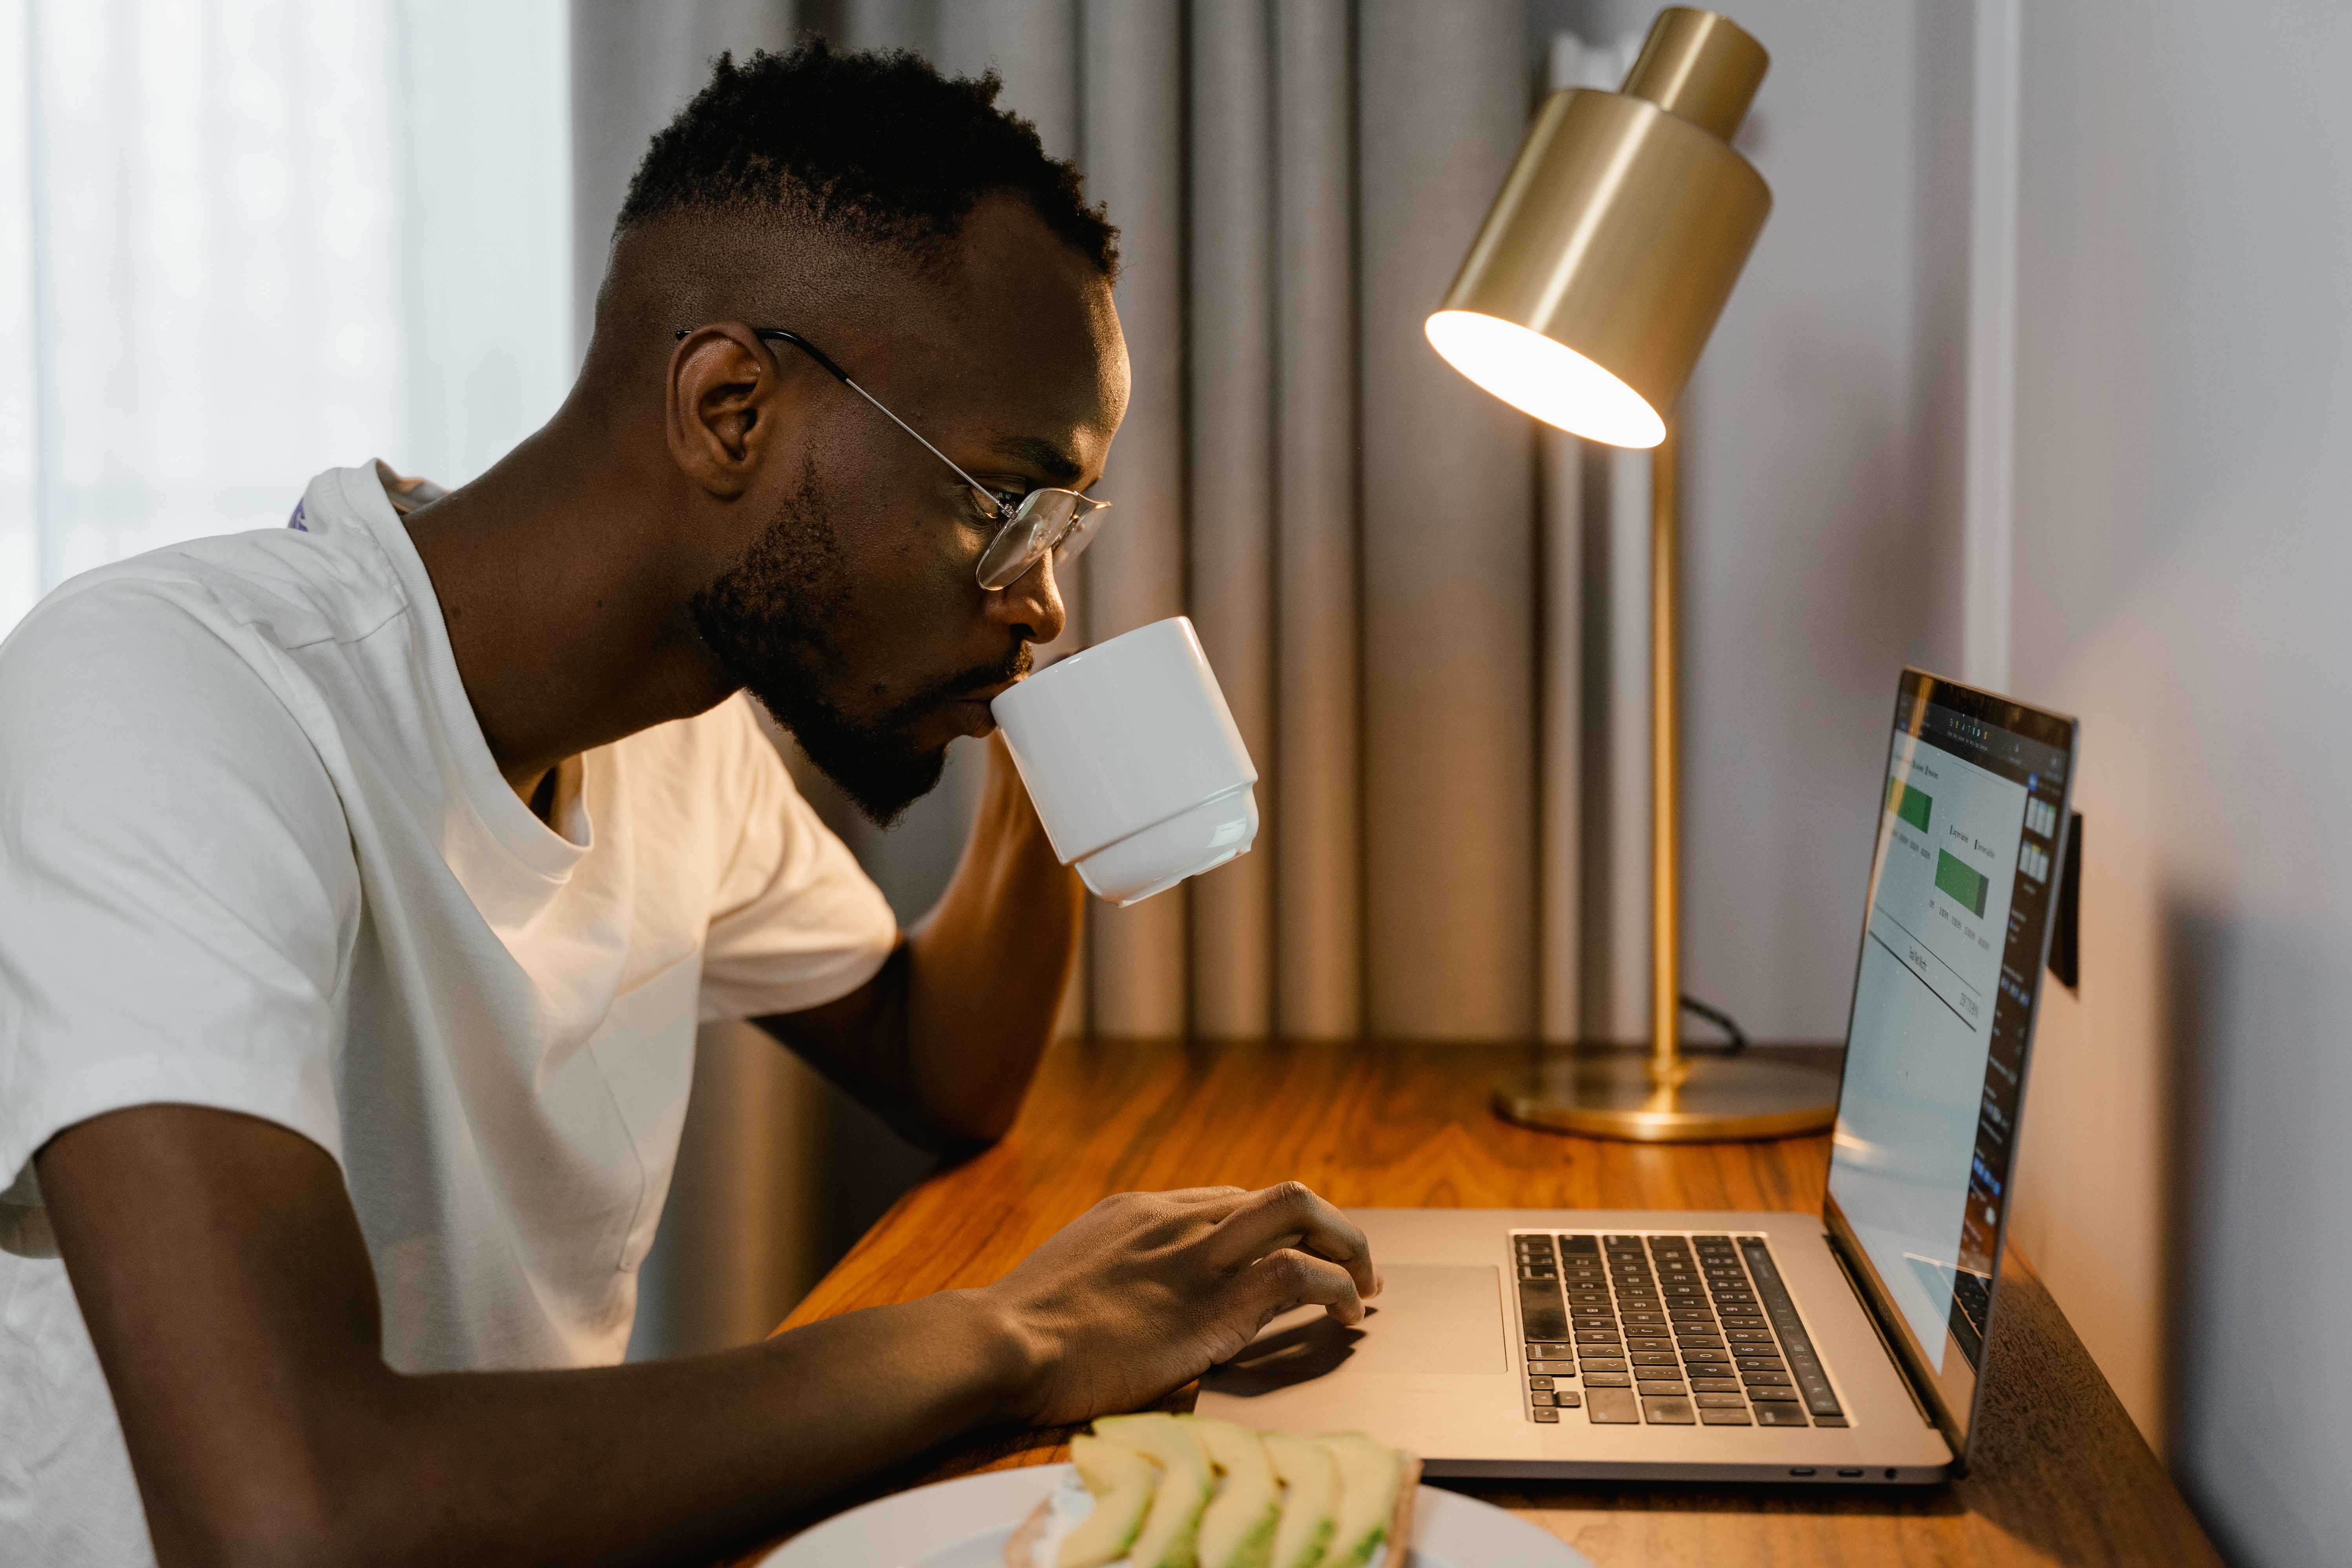 Man sipping from a coffee mug while working on a laptop at home